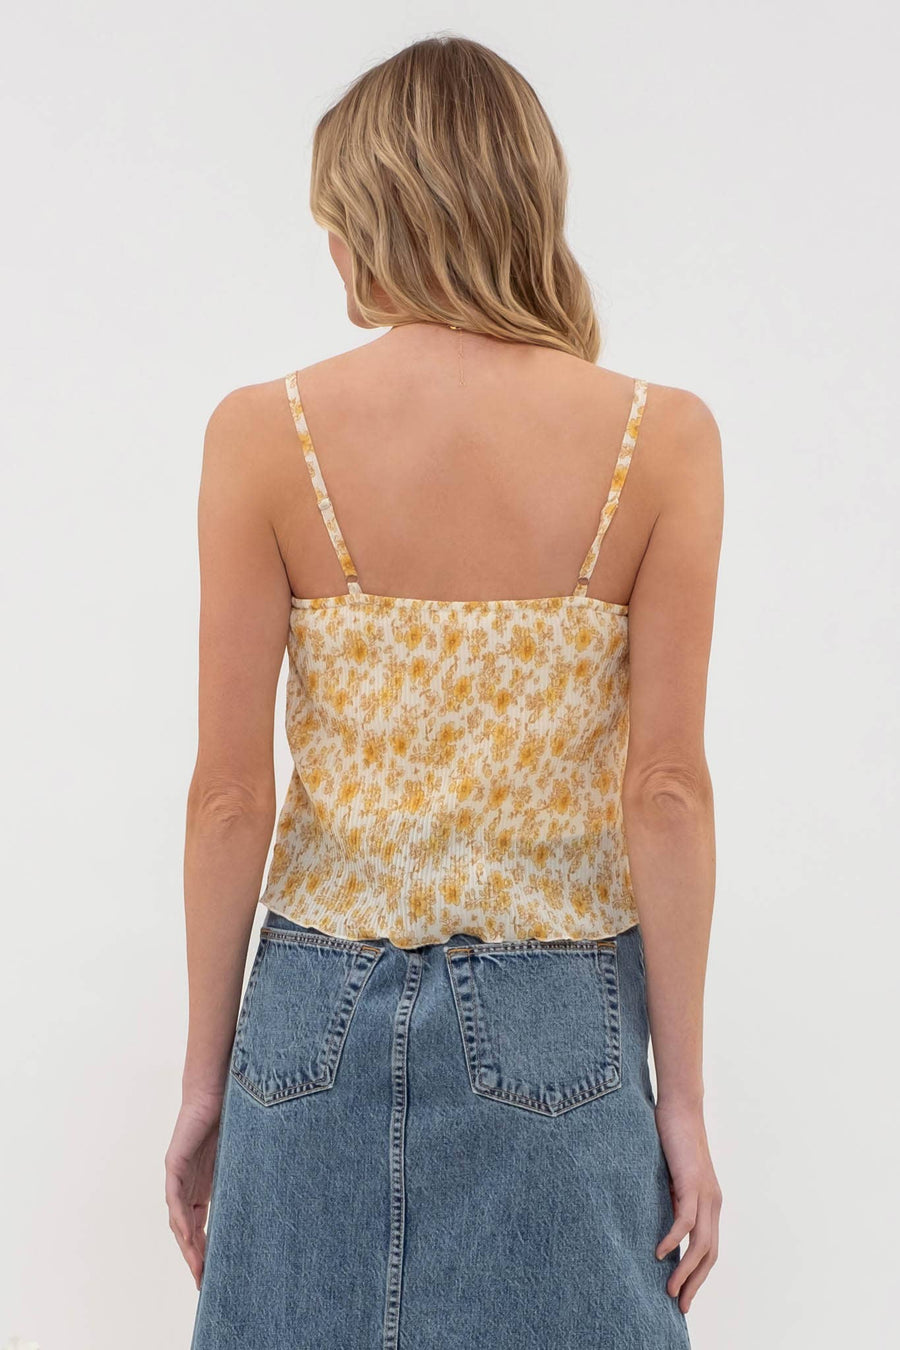 “Lainee” Floral Print Cami Top